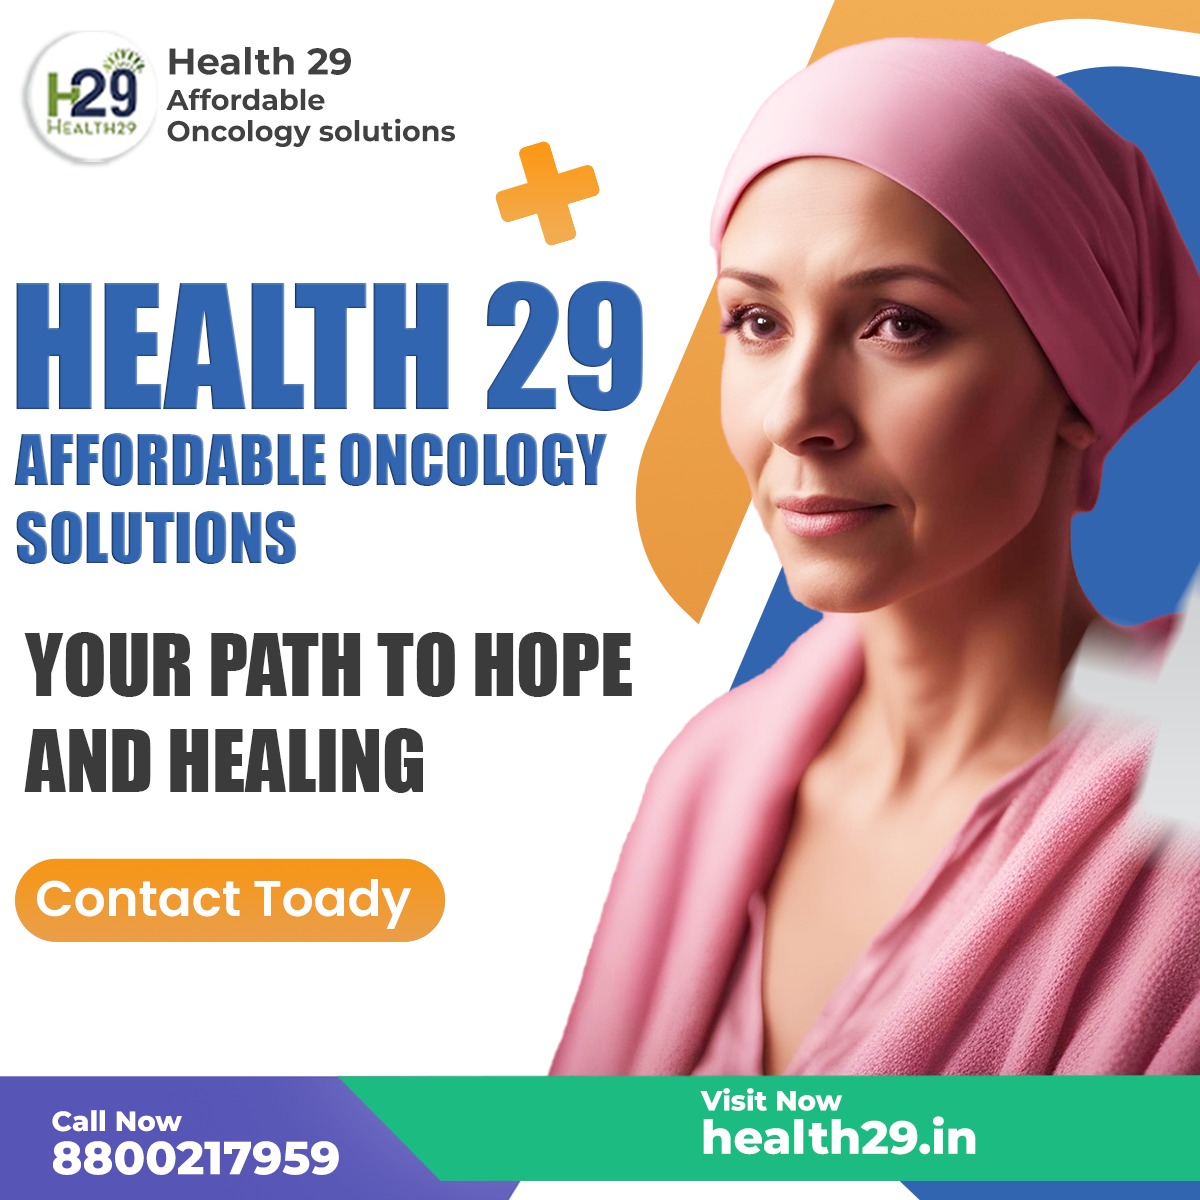 Revolutionizing Cancer Care: Affordable Oncology Solutions with Health29